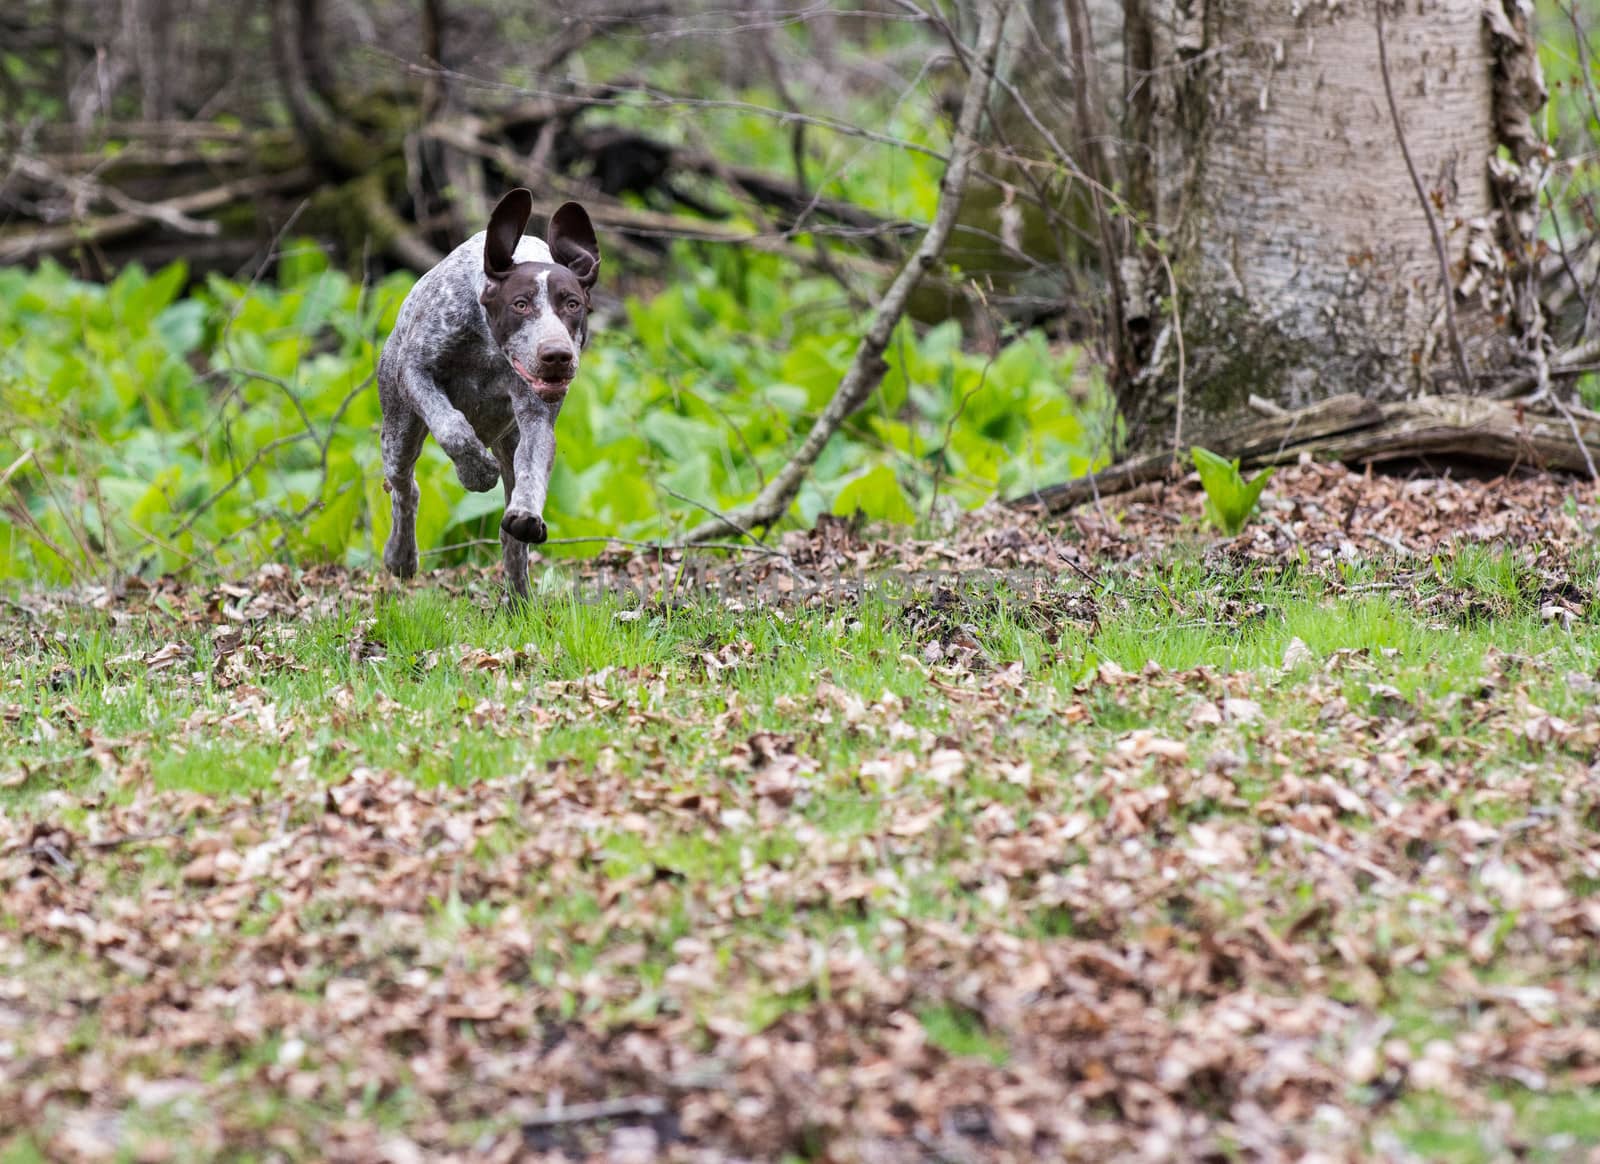 german shorthaired pointer by willeecole123